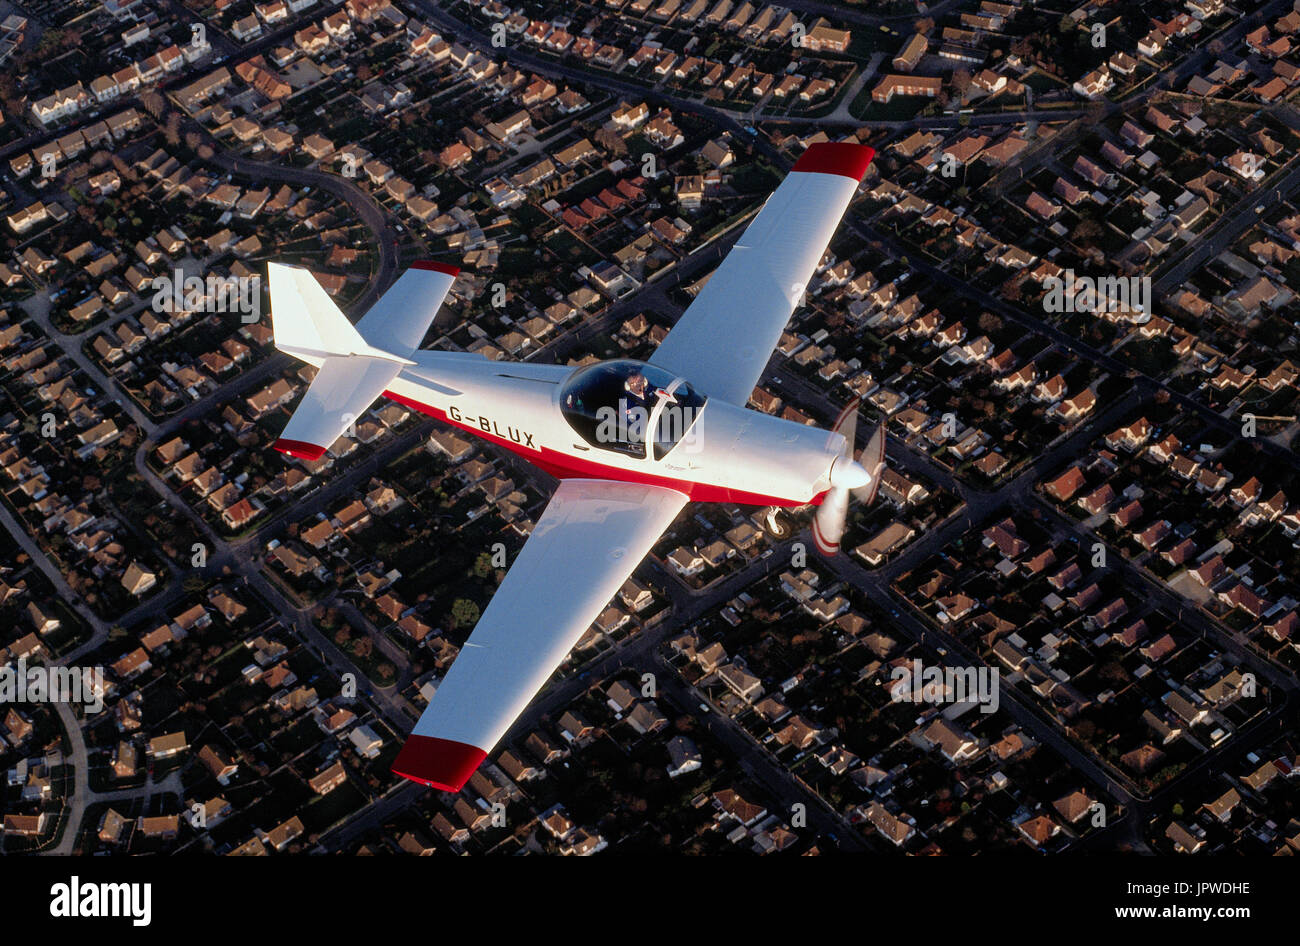 Slingsby T-67 Firefly wearing B class test registration flying over houses Stock Photo